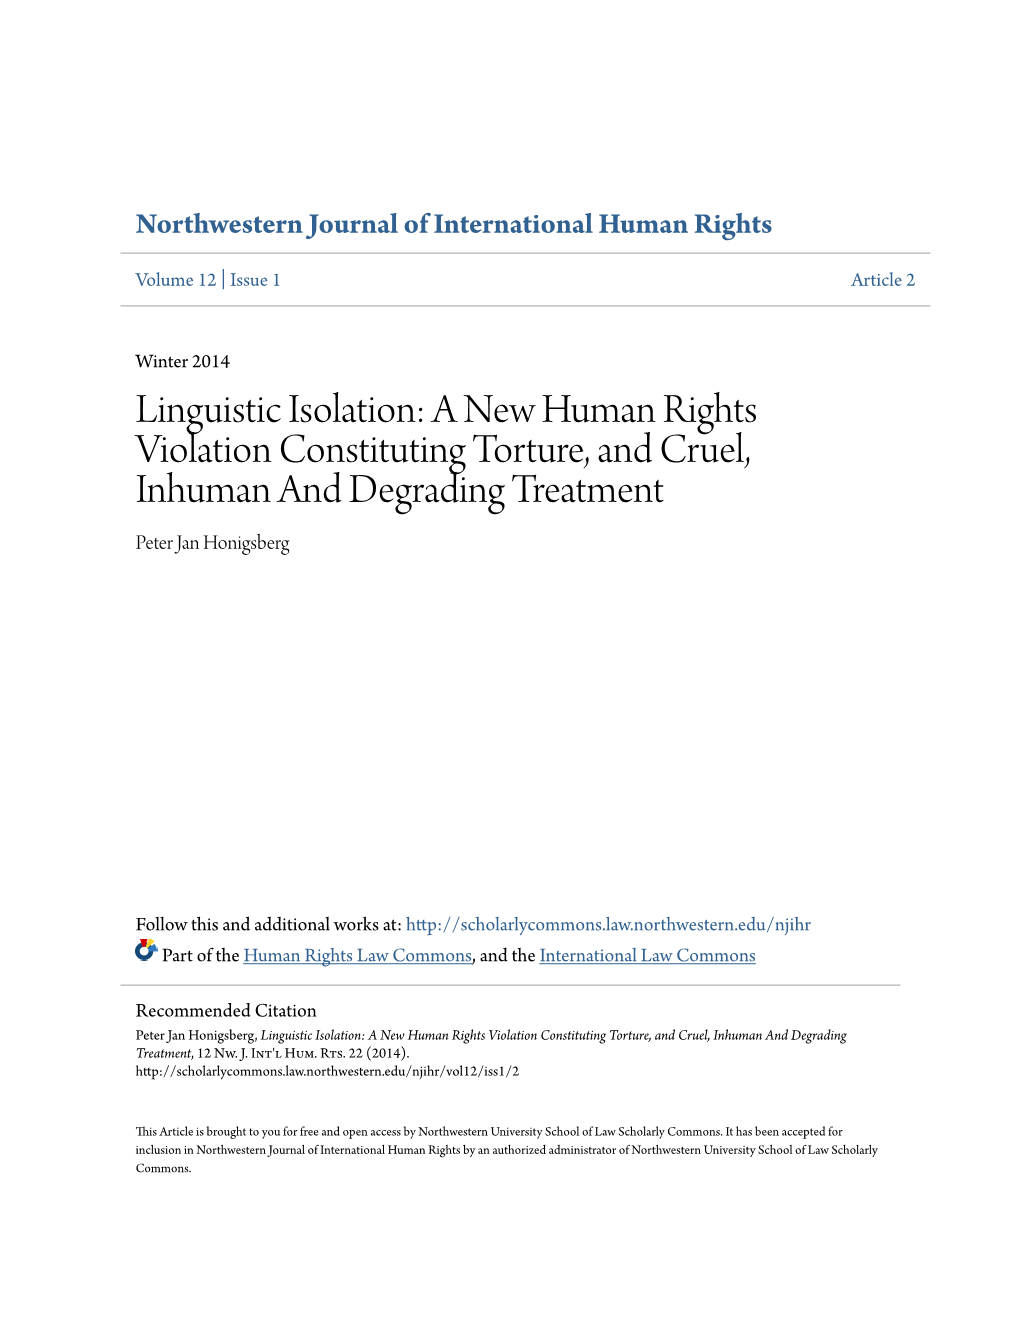 Linguistic Isolation: a New Human Rights Violation Constituting Torture, and Cruel, Inhuman and Degrading Treatment Peter Jan Honigsberg